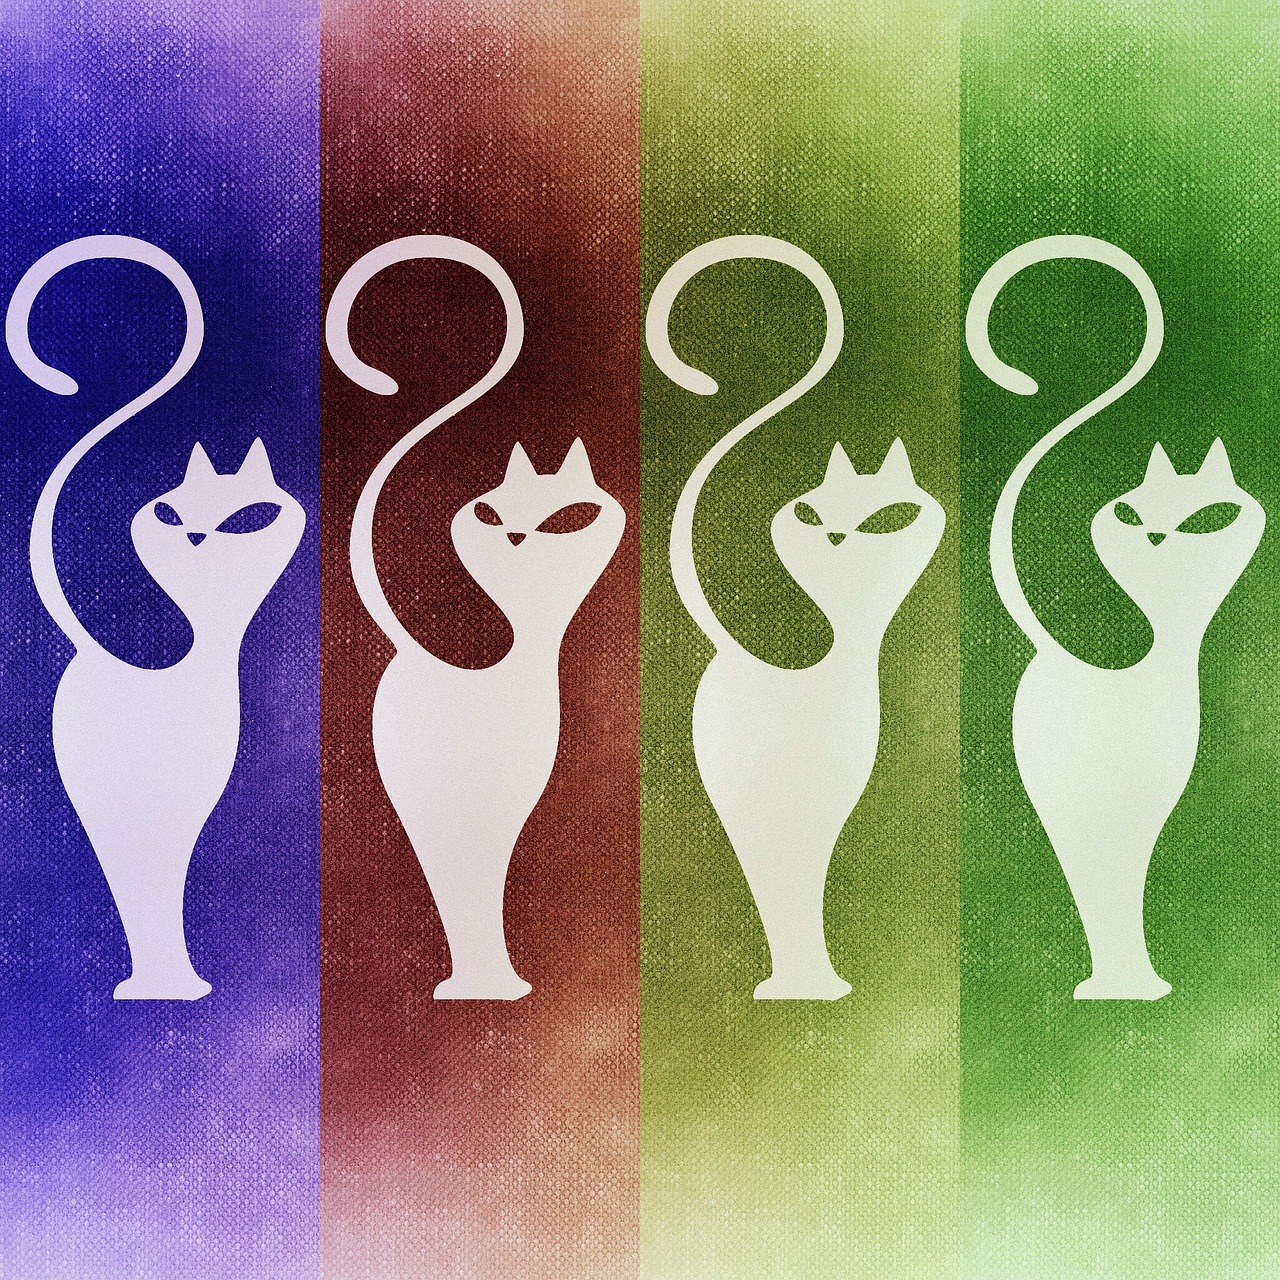 cat abstract background free photo